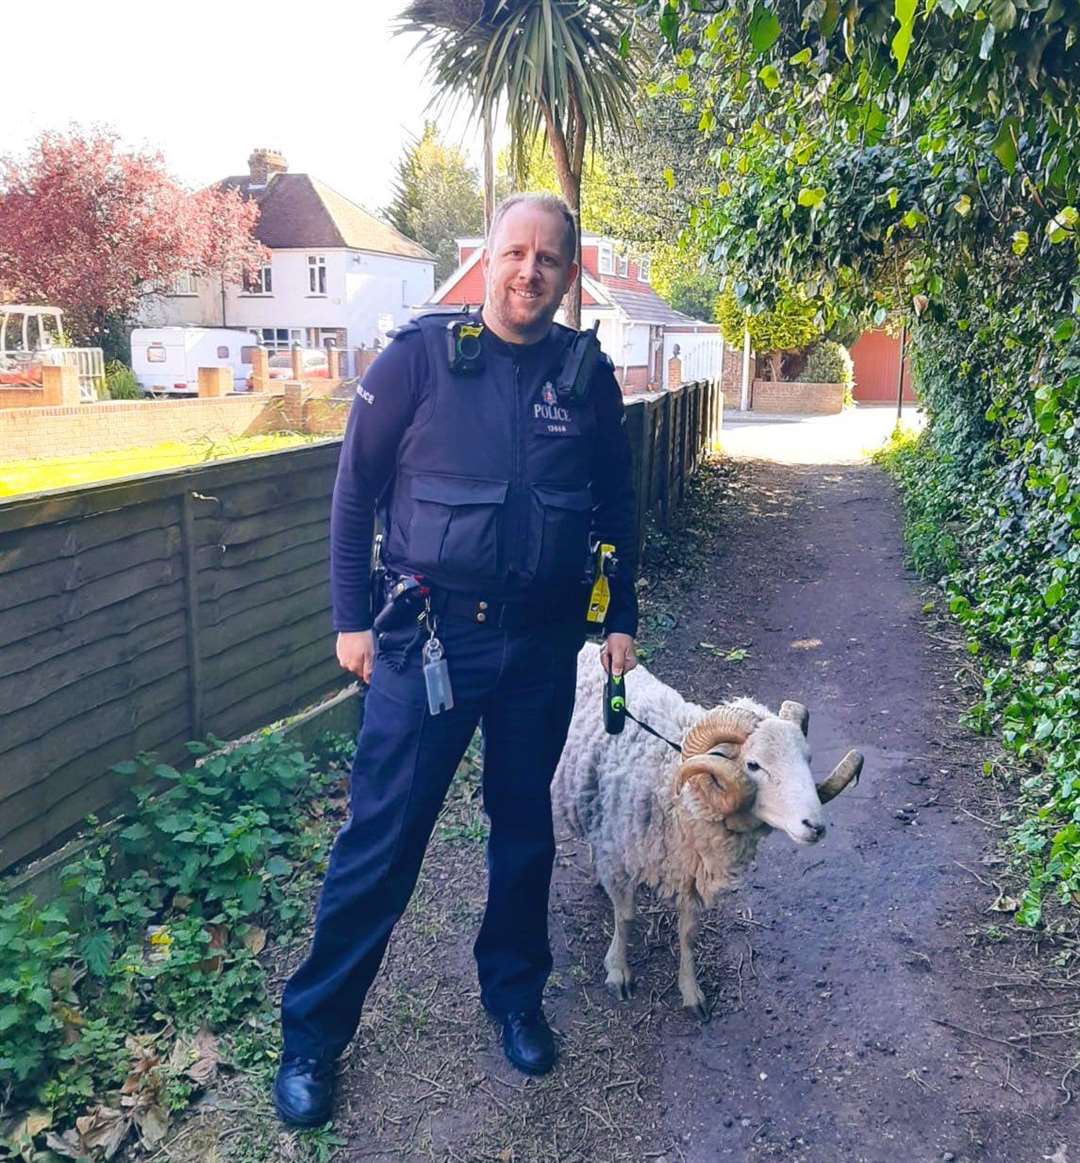 PC Hewes helped escort the missing sheep home Photo: Kent Police